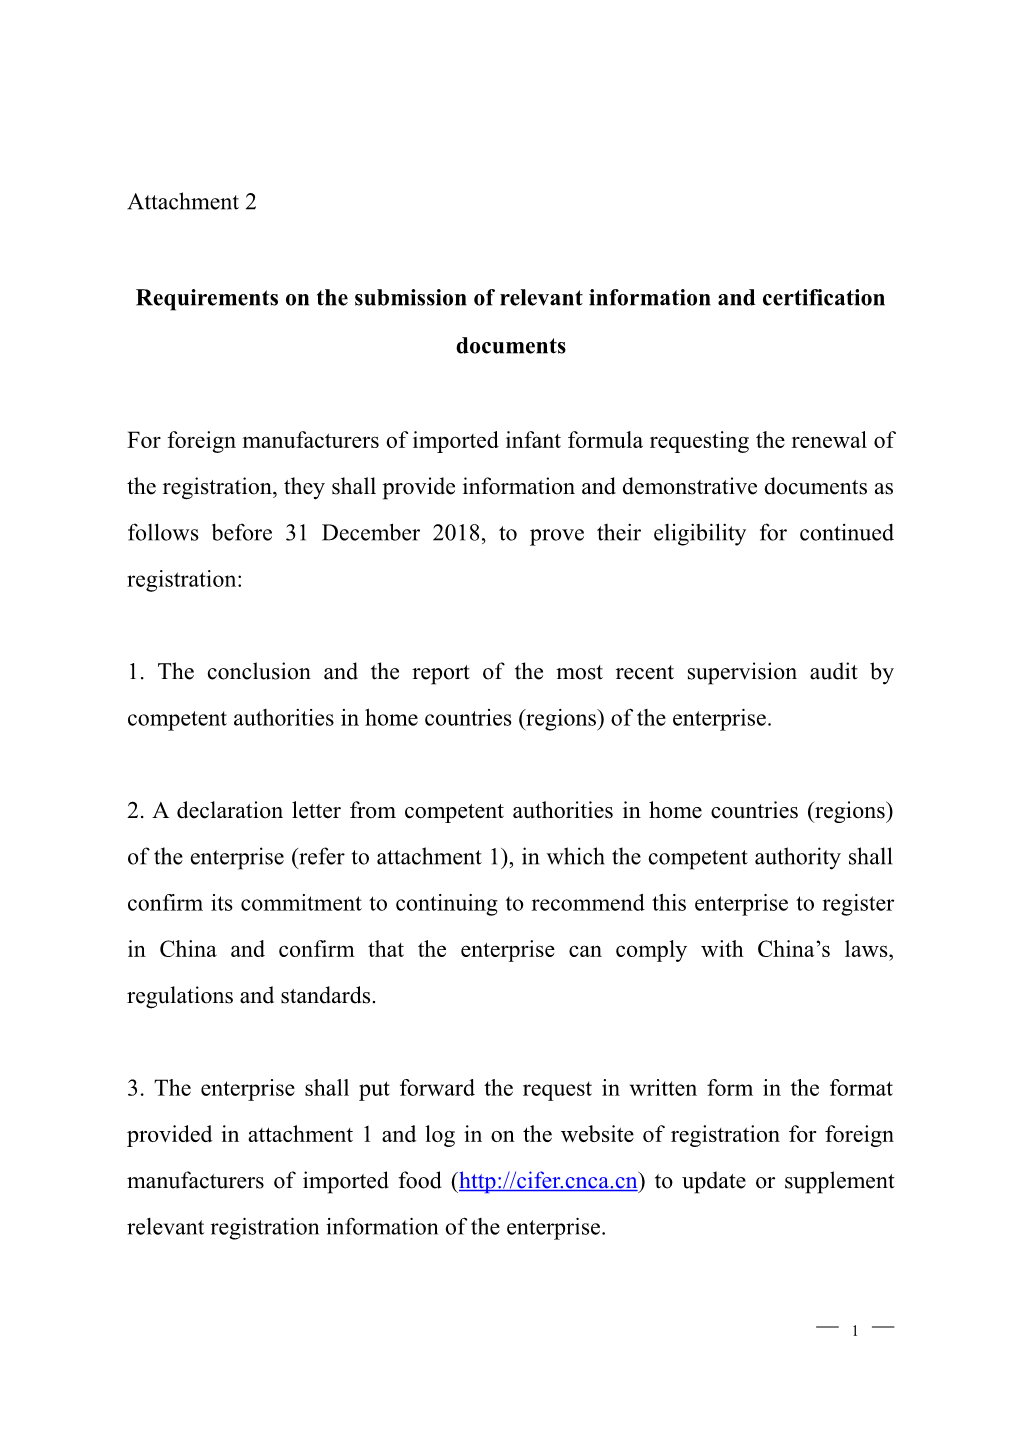 Requirements on the Submission of Relevant Information and Certification Documents